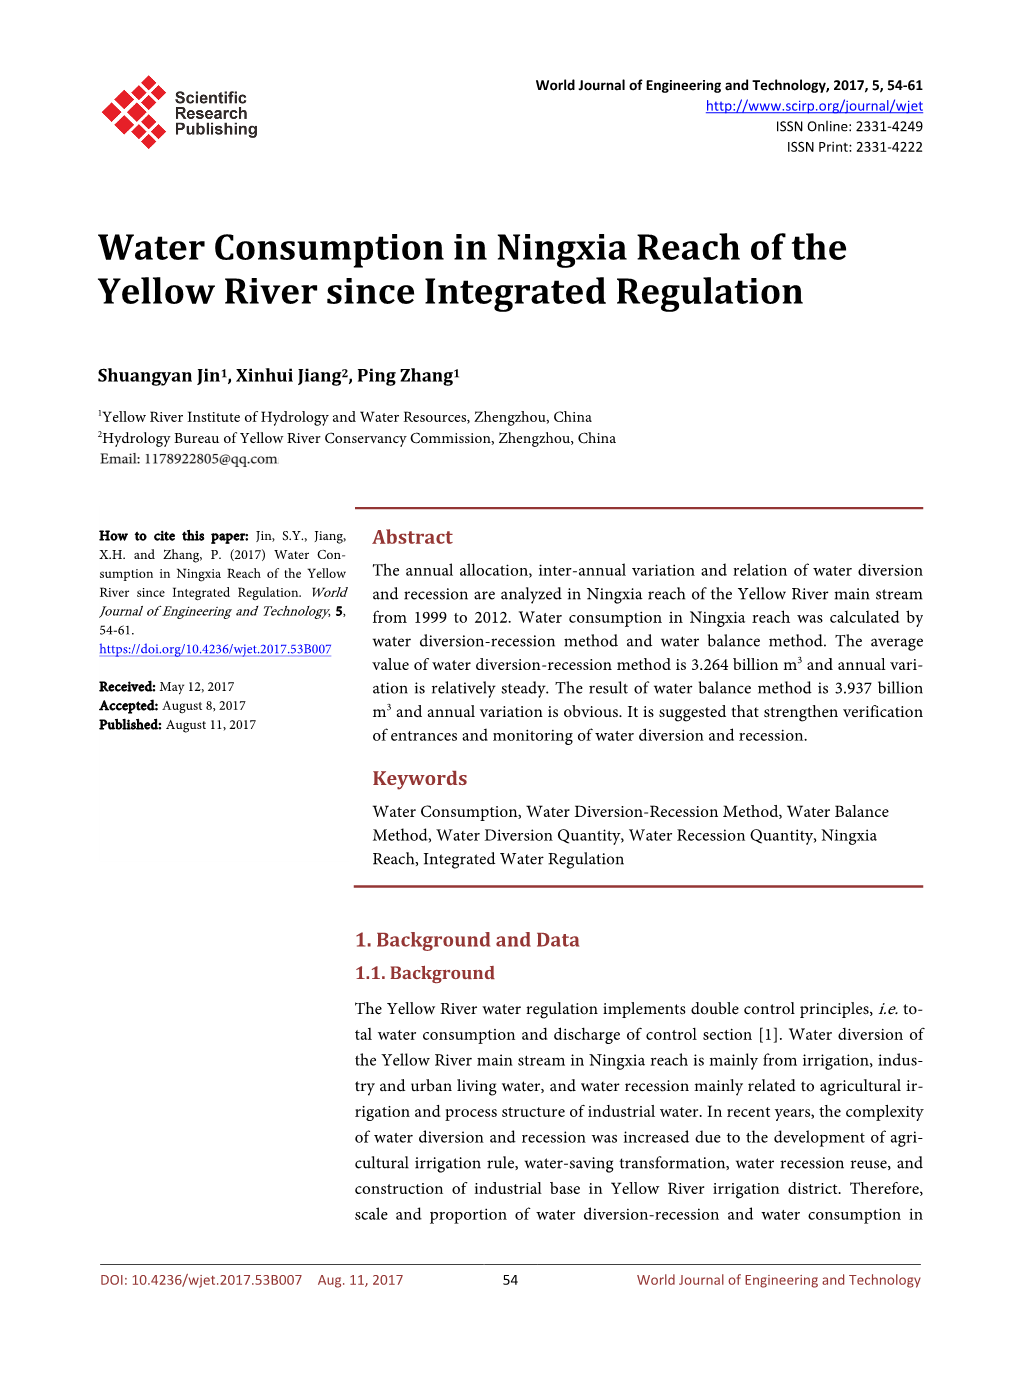 Water Consumption in Ningxia Reach of the Yellow River Since Integrated Regulation